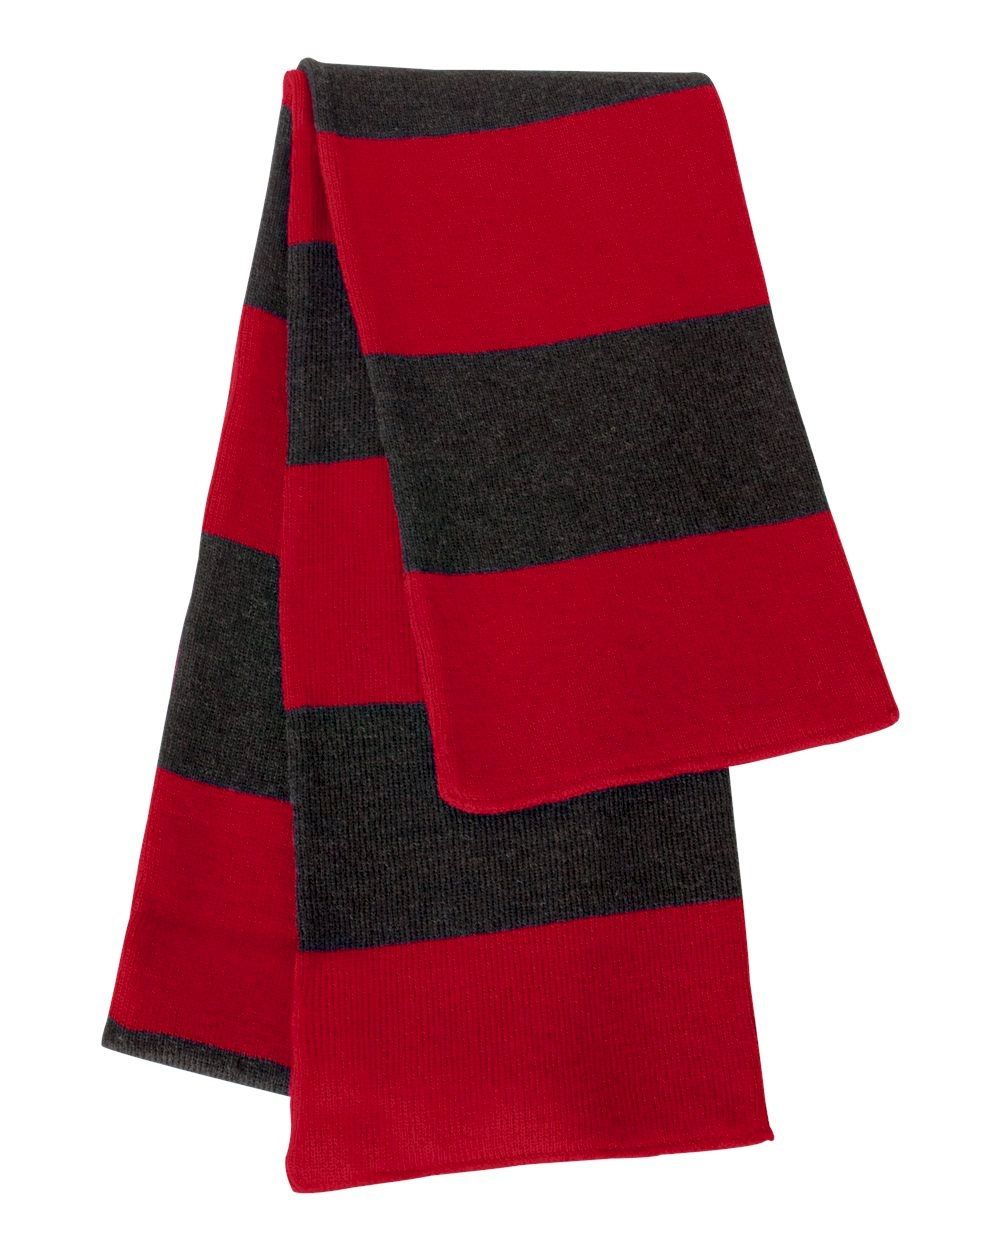 Rugby Striped Knit Scarf Embroidery Blanks - RED/CHARCOAL